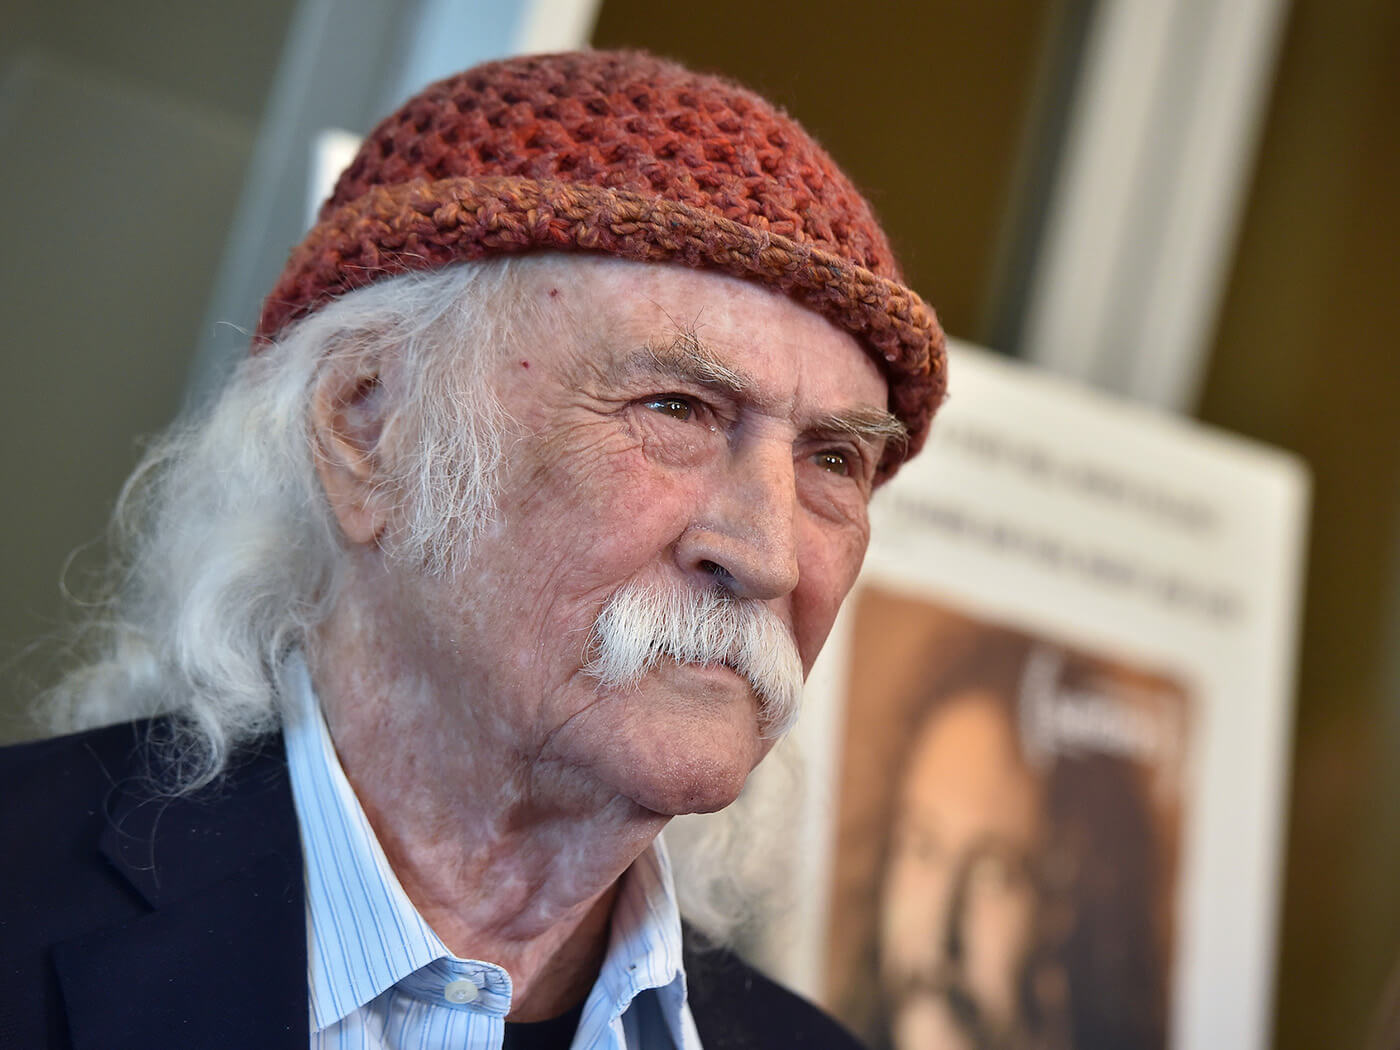 Graham Nash pays tribute to David Crosby, dead at 81